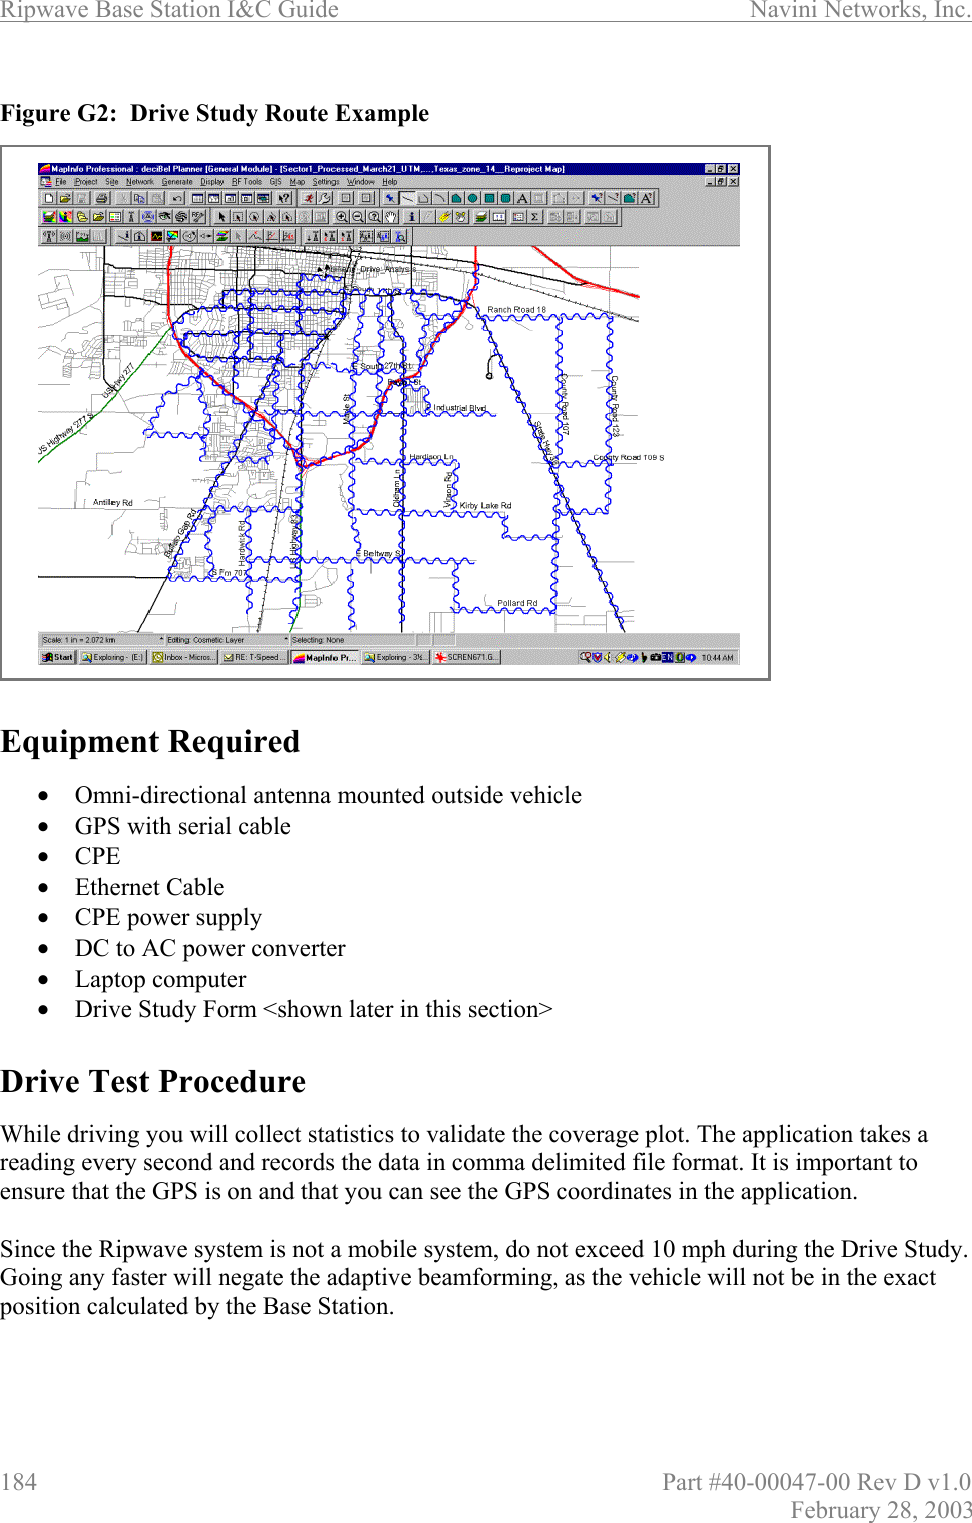 Ripwave Base Station I&amp;C Guide                      Navini Networks, Inc. 184                          Part #40-00047-00 Rev D v1.0 February 28, 2003  Figure G2:  Drive Study Route Example                      Equipment Required  •  Omni-directional antenna mounted outside vehicle •  GPS with serial cable  •  CPE •  Ethernet Cable •  CPE power supply •  DC to AC power converter •  Laptop computer •  Drive Study Form &lt;shown later in this section&gt;   Drive Test Procedure  While driving you will collect statistics to validate the coverage plot. The application takes a reading every second and records the data in comma delimited file format. It is important to ensure that the GPS is on and that you can see the GPS coordinates in the application.   Since the Ripwave system is not a mobile system, do not exceed 10 mph during the Drive Study. Going any faster will negate the adaptive beamforming, as the vehicle will not be in the exact position calculated by the Base Station.   